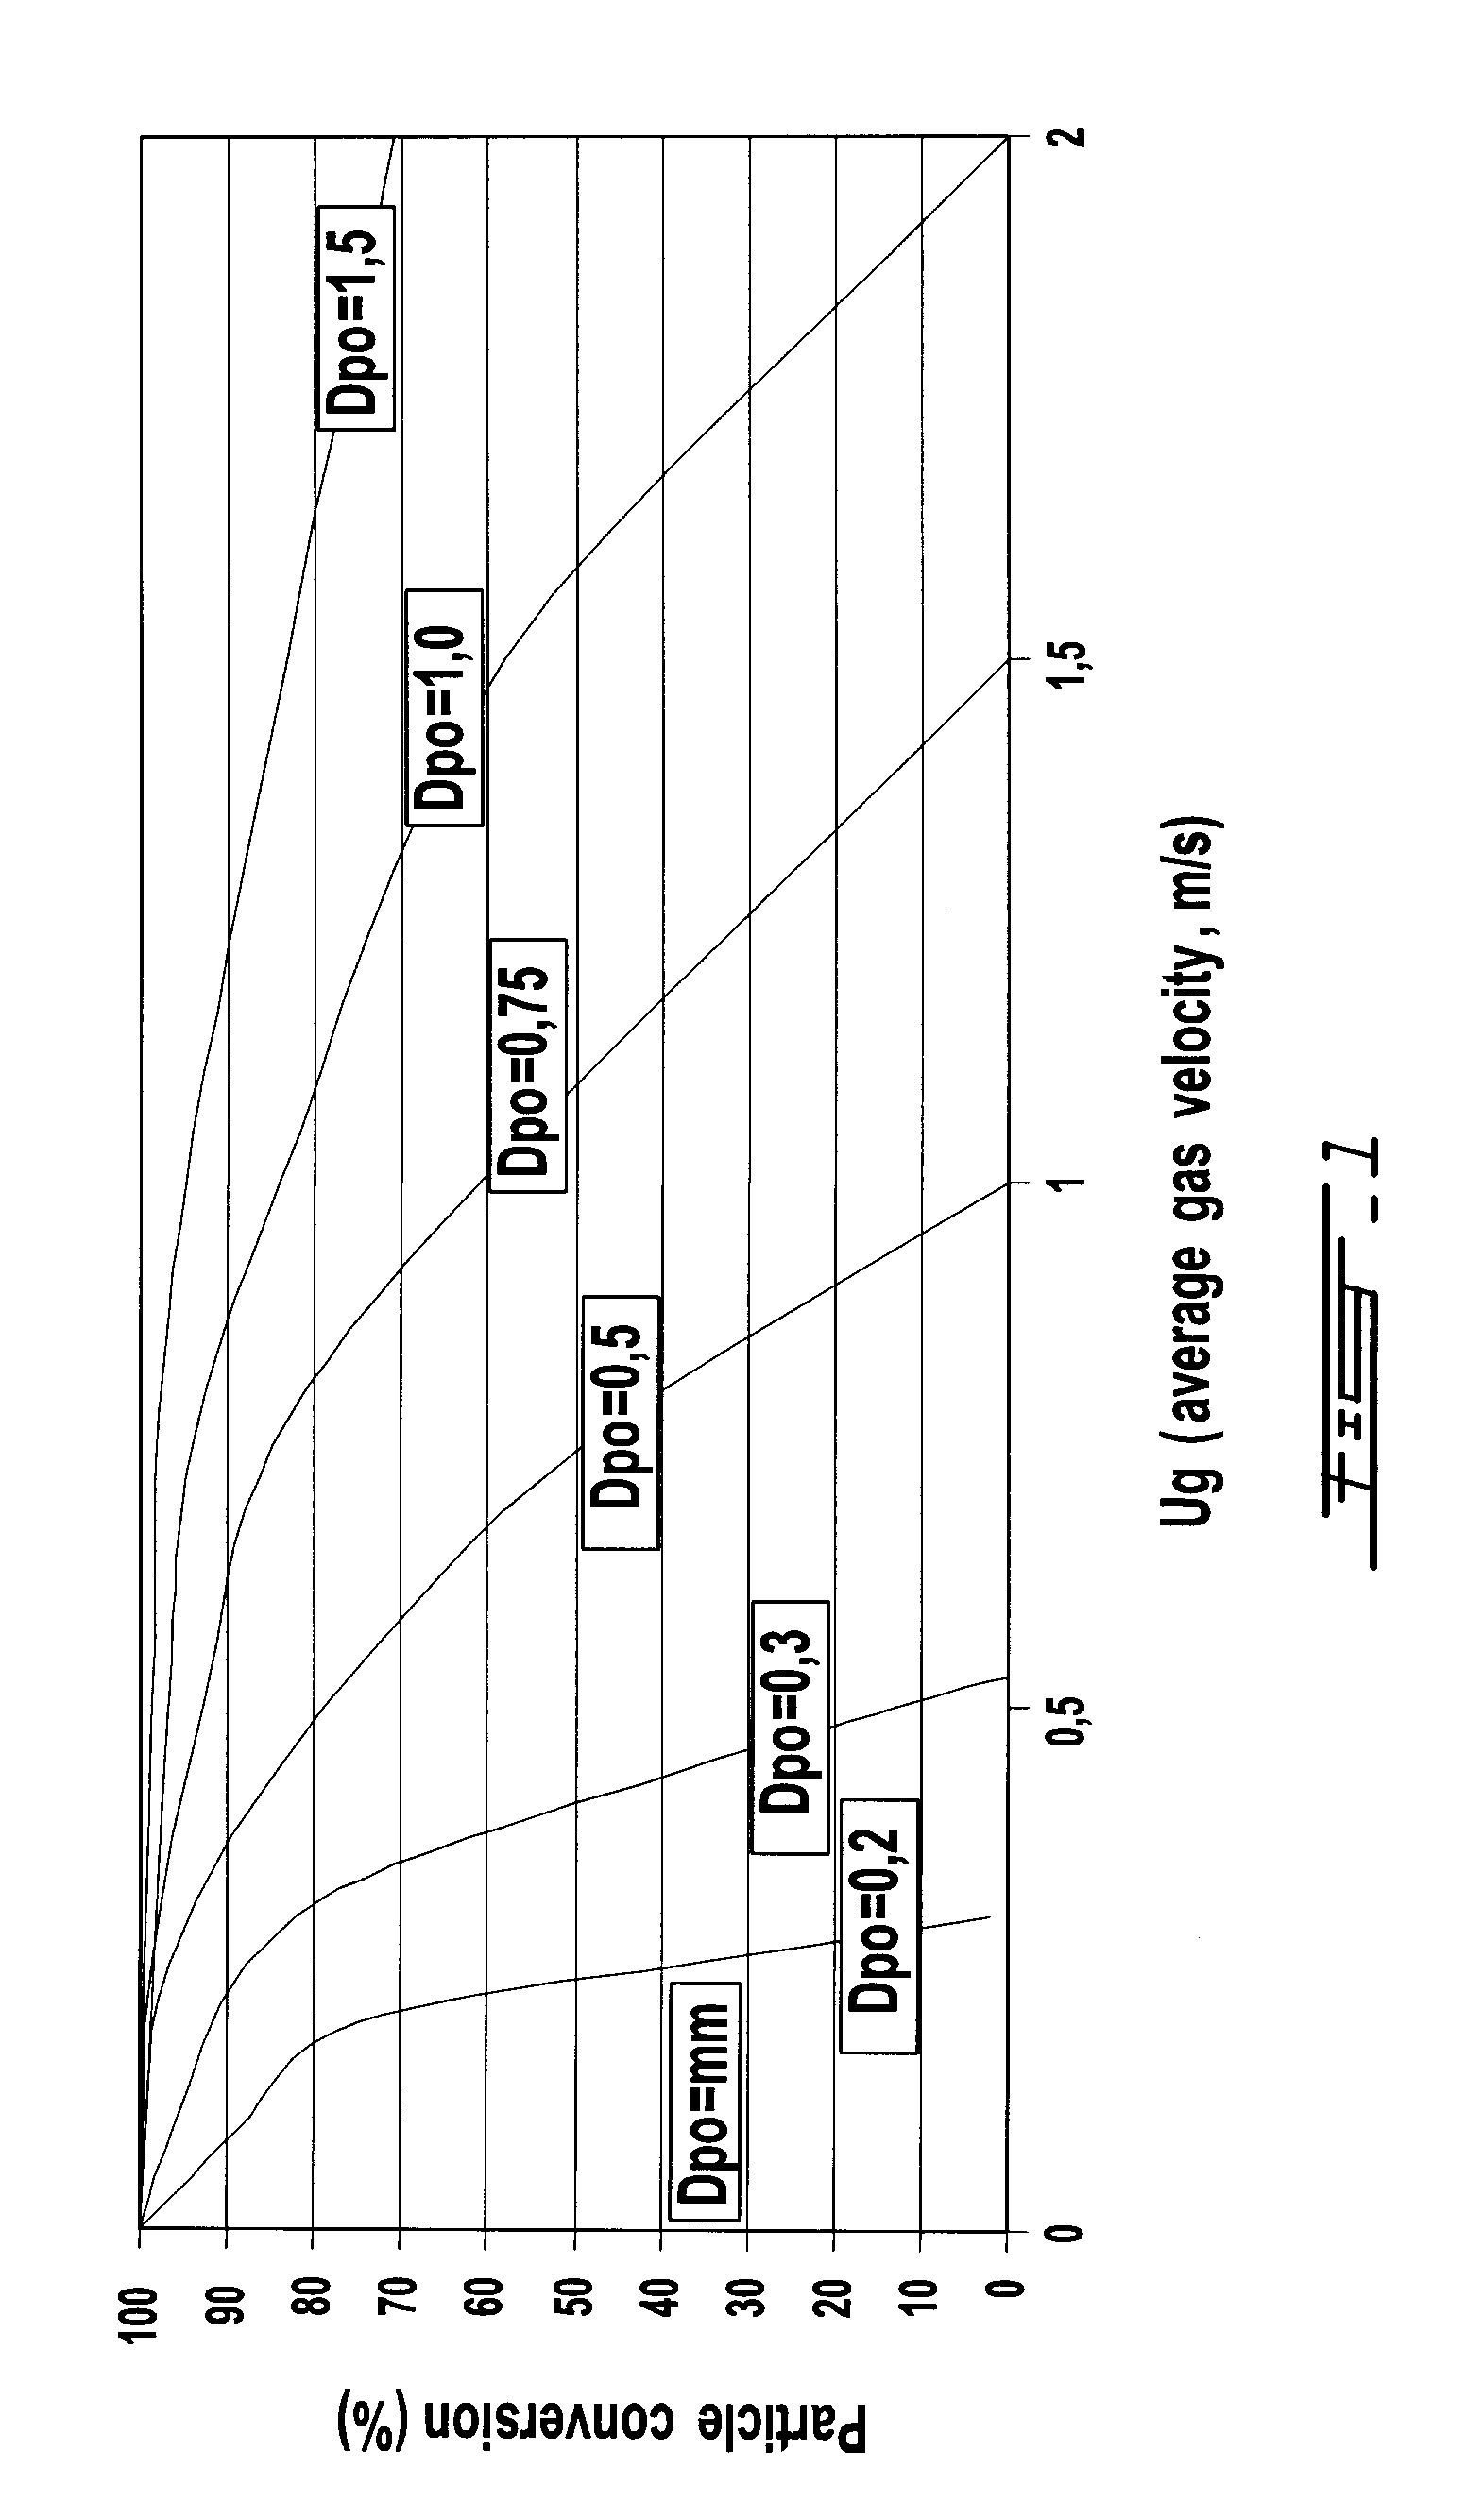 Method for low-severity gasification of heavy petroleum residues